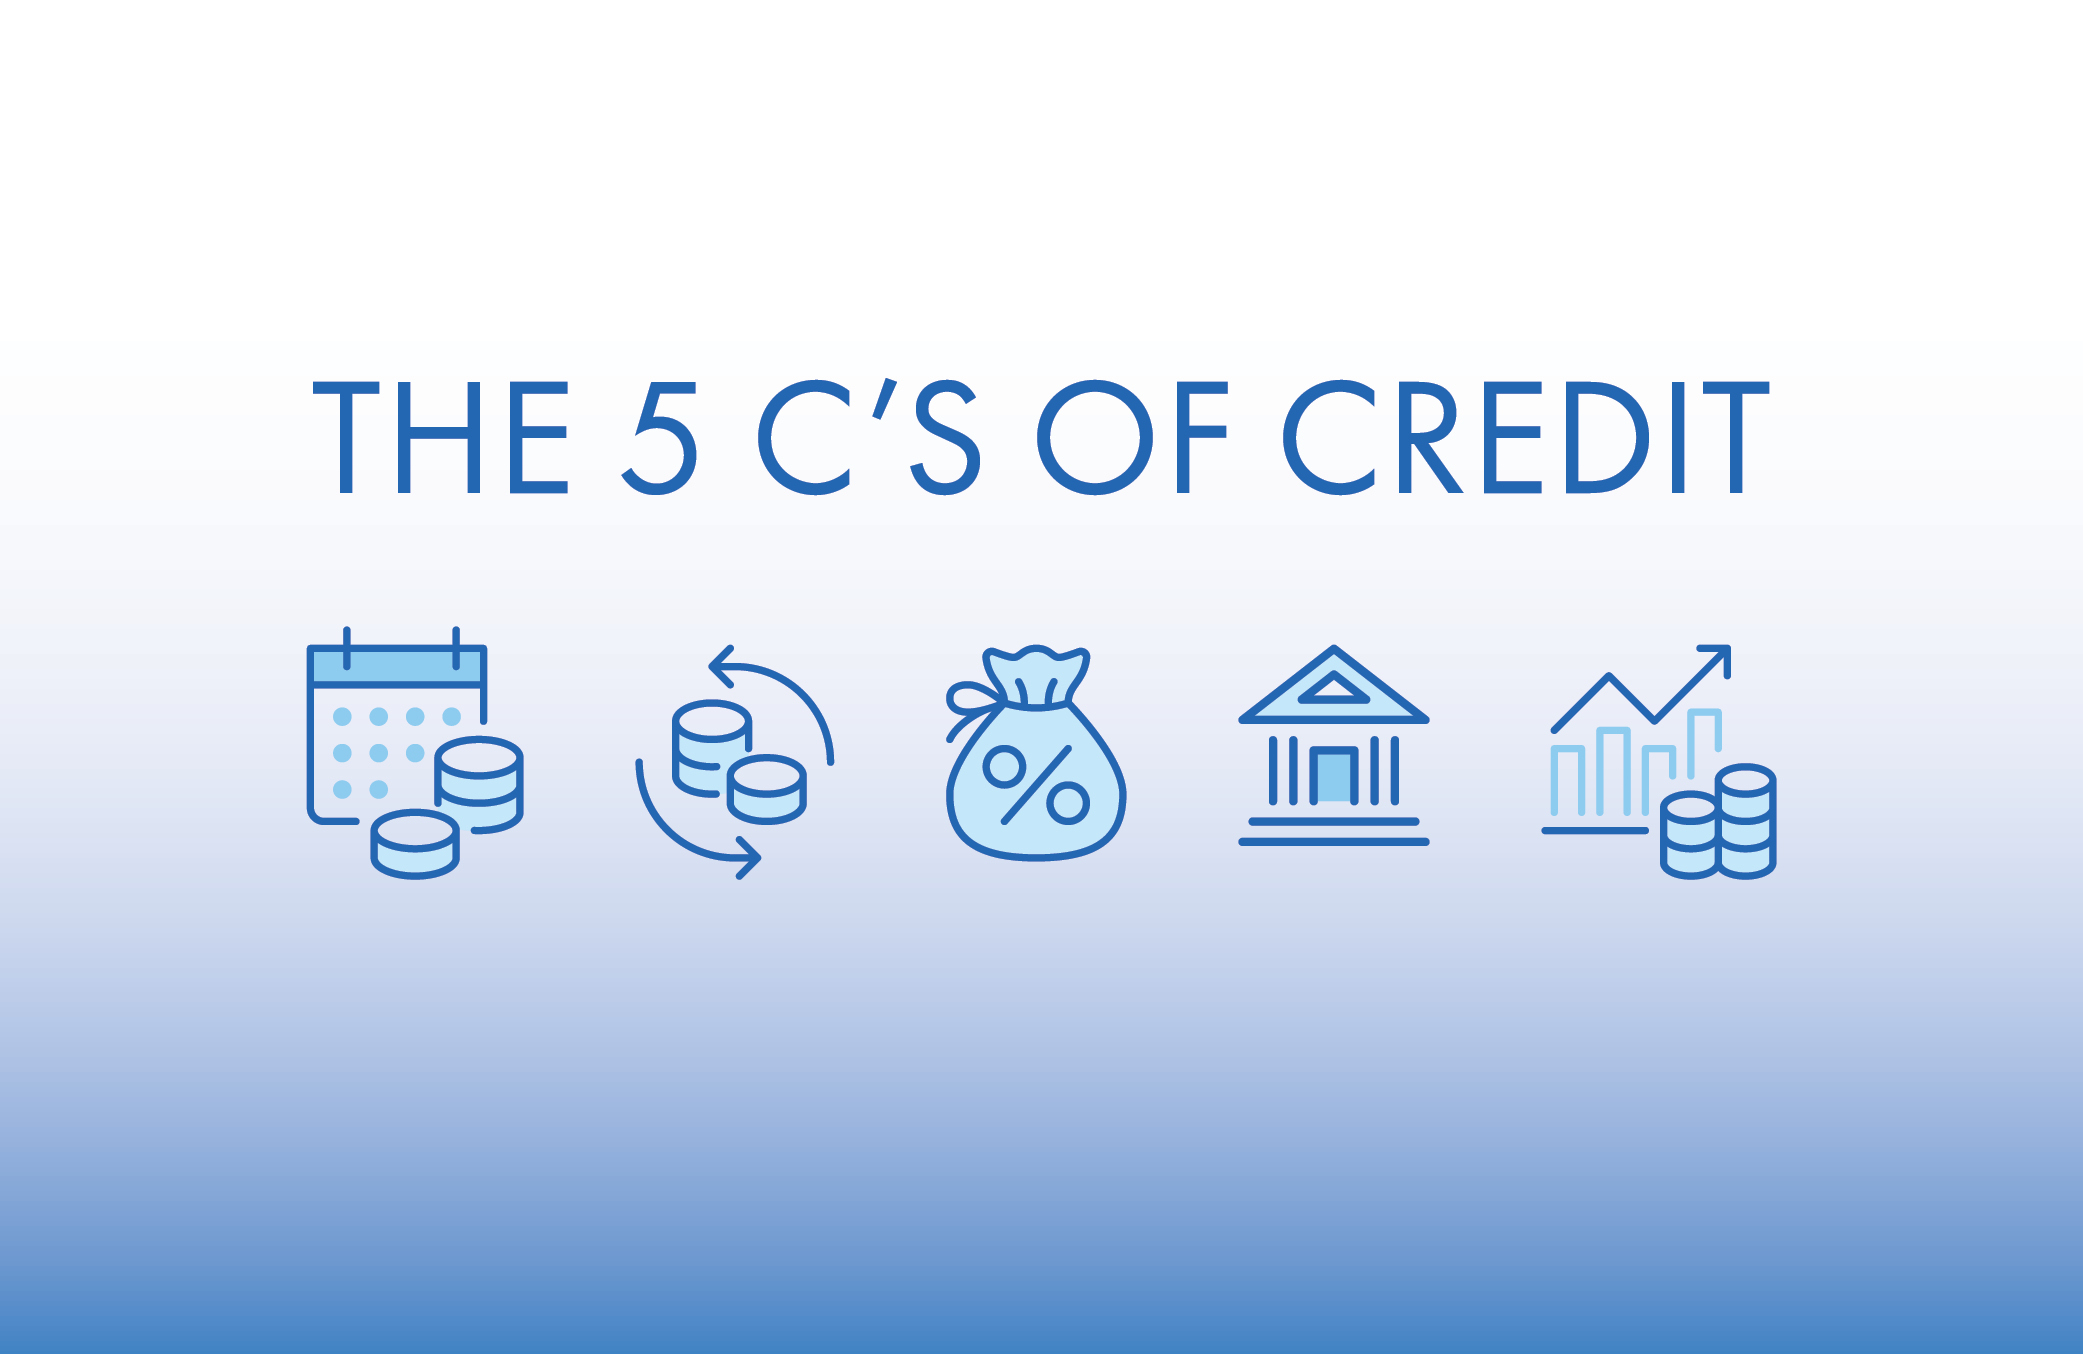 The 5 C's of Credit